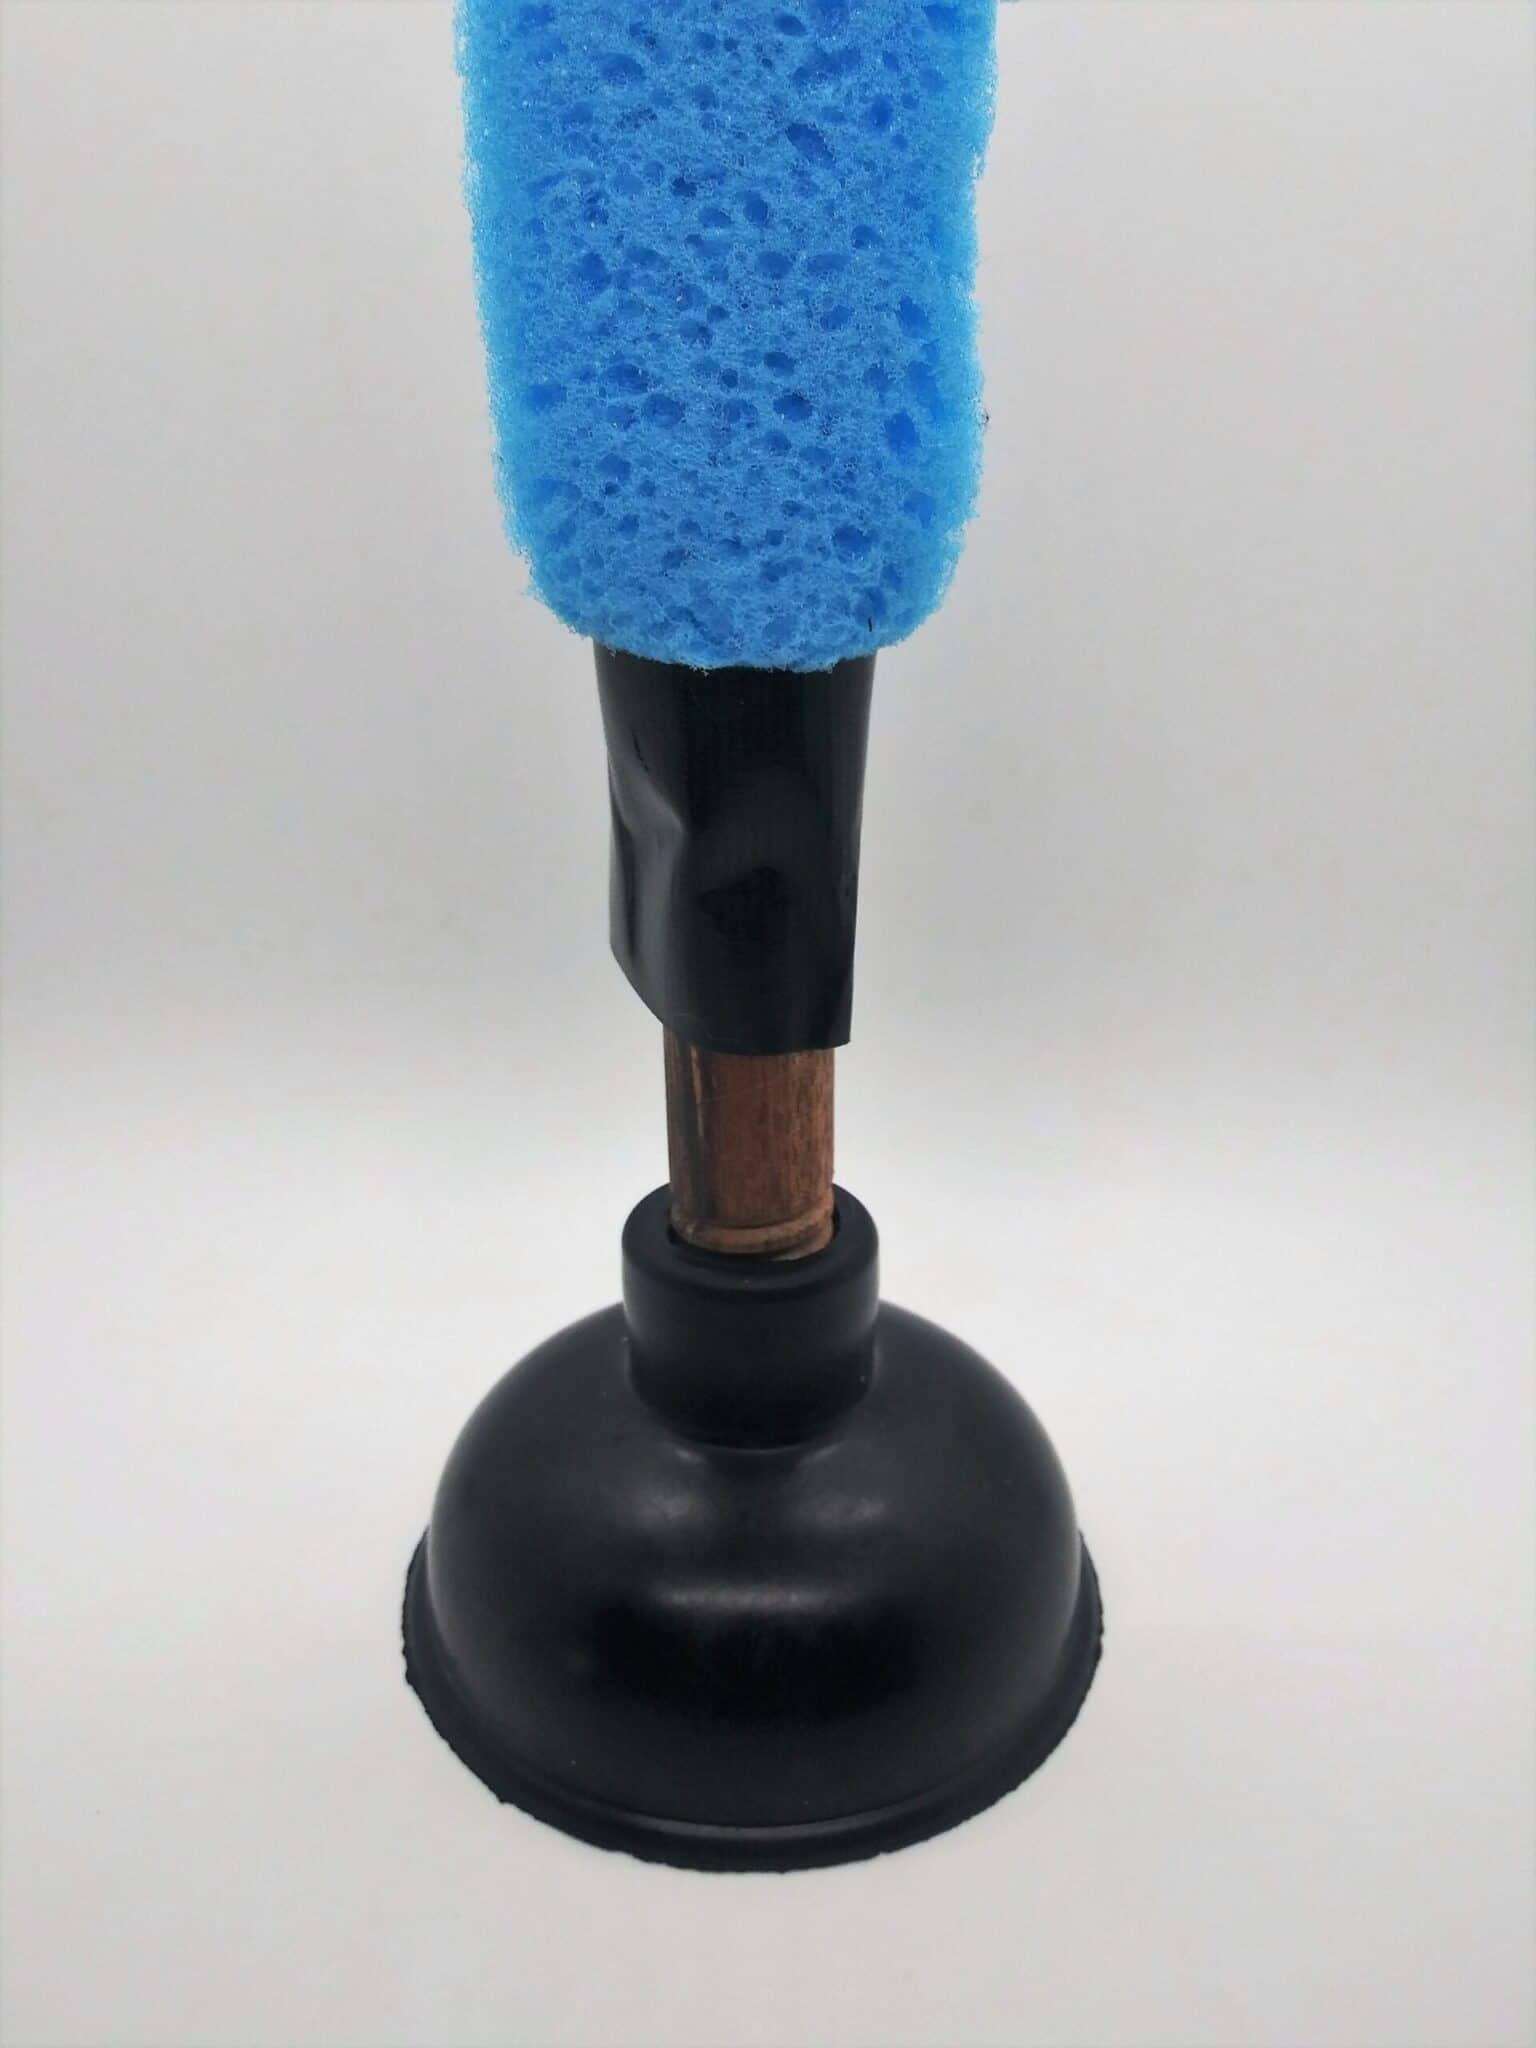 DIY anal sex toys using a plunger. Photo of a sponge covering a plunger handle and secured at the bottom using duct tape.